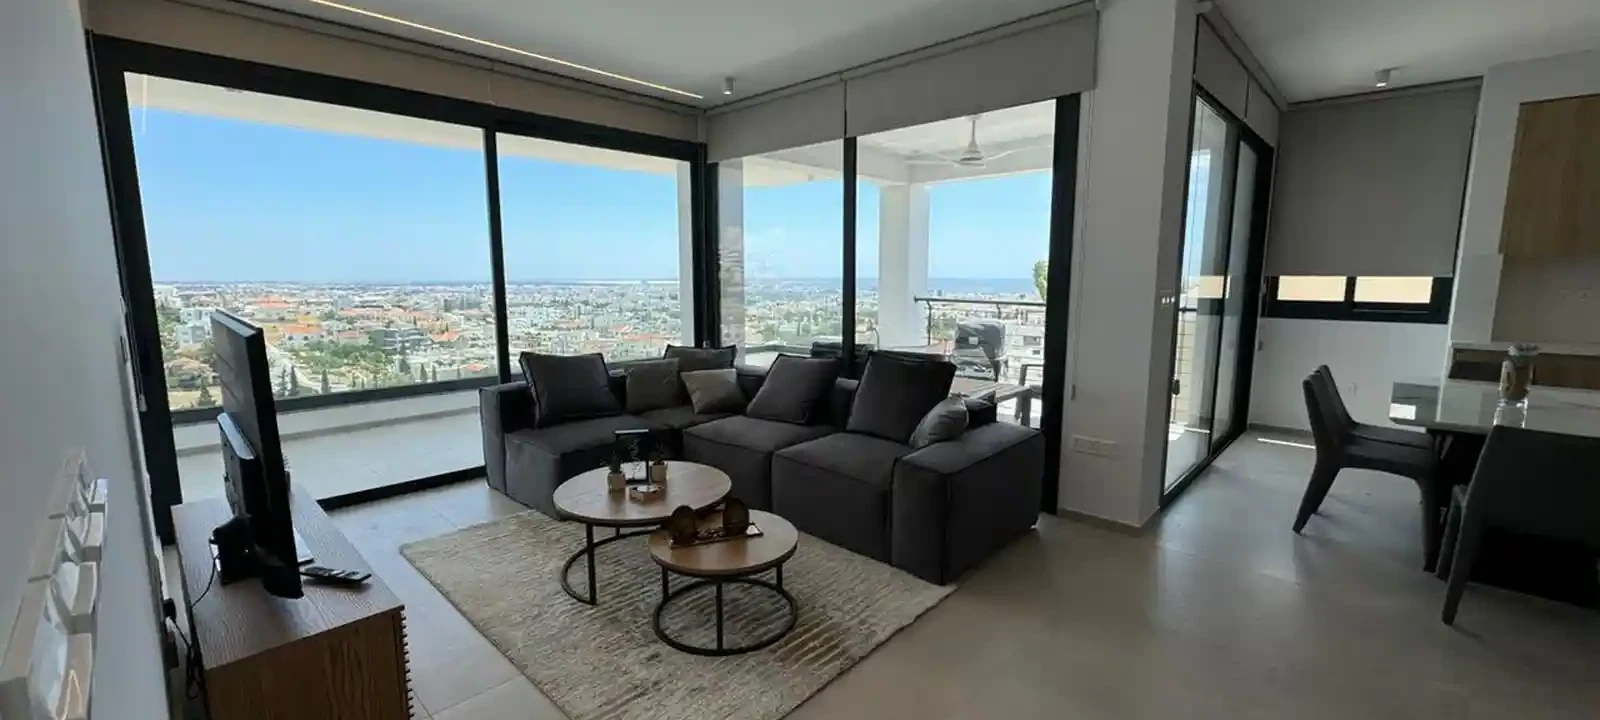 2-bedroom apartment to rent €2.700, image 1